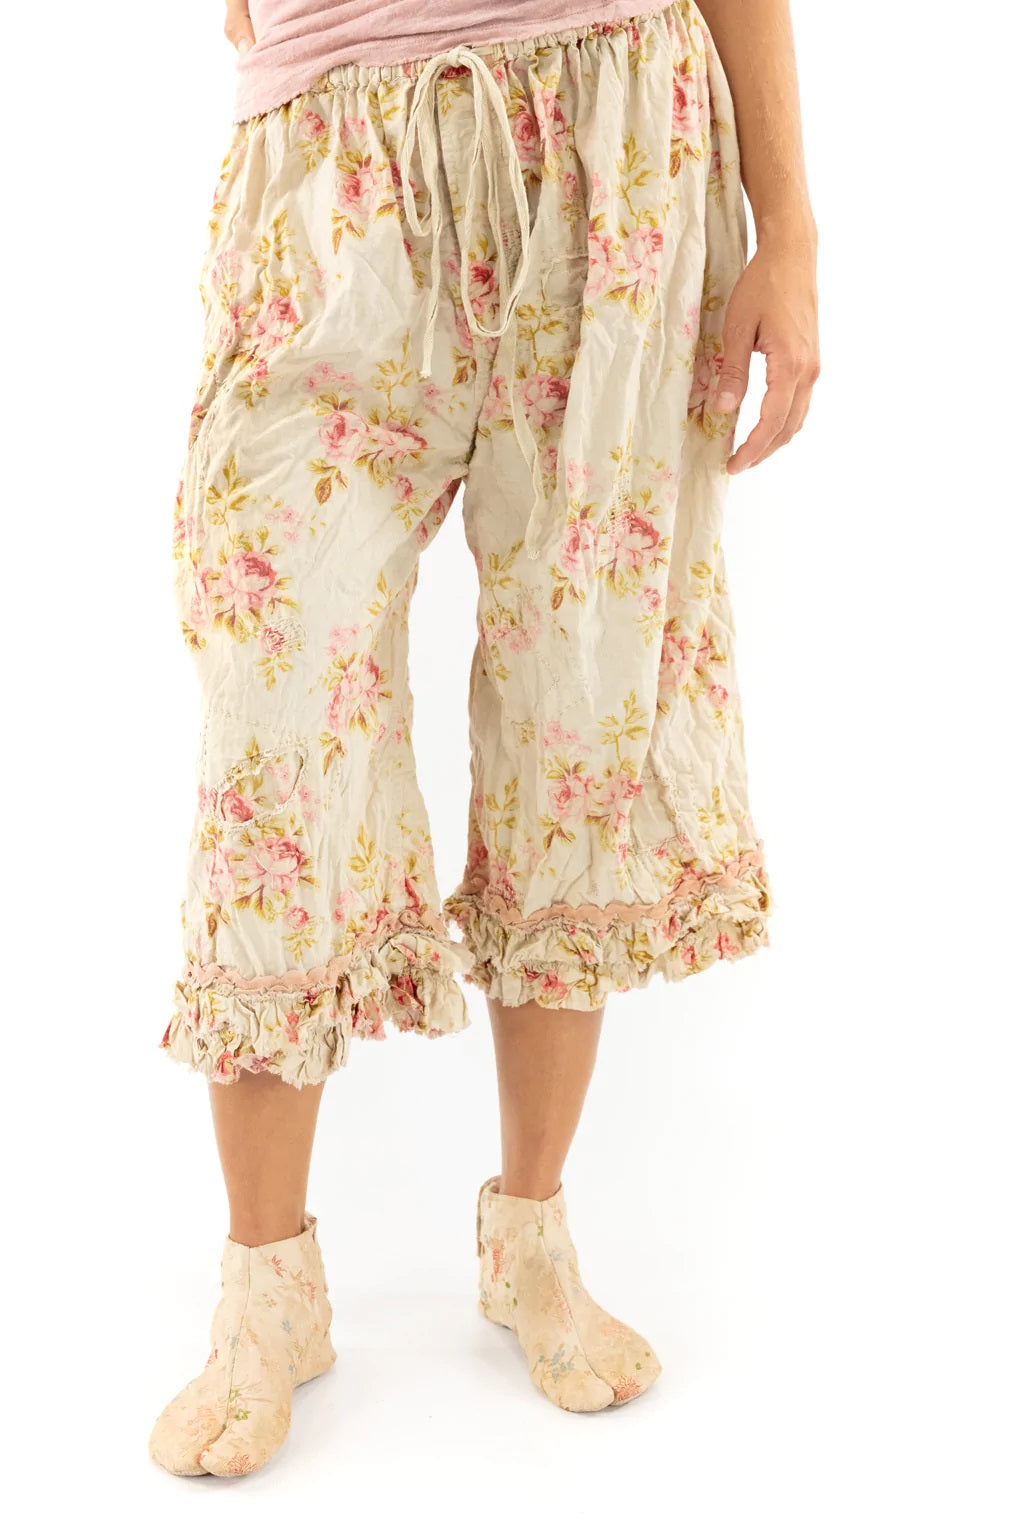 FLORAL KHLOE BLOOMERS - CORALIE - Kingfisher Road - Online Boutique